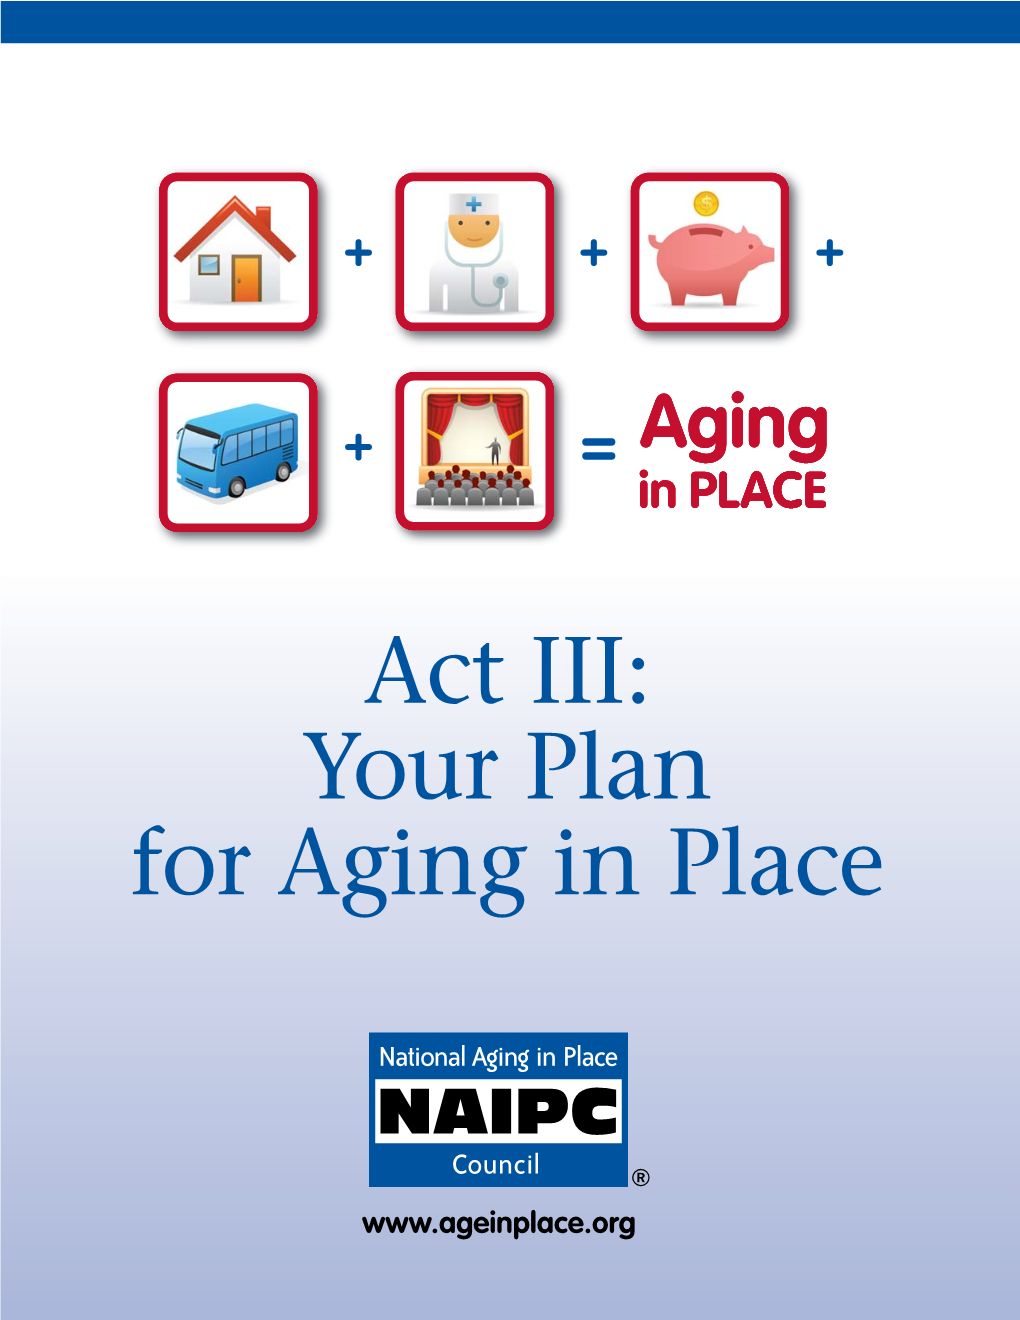 Act III: Your Plan for Aging in Place